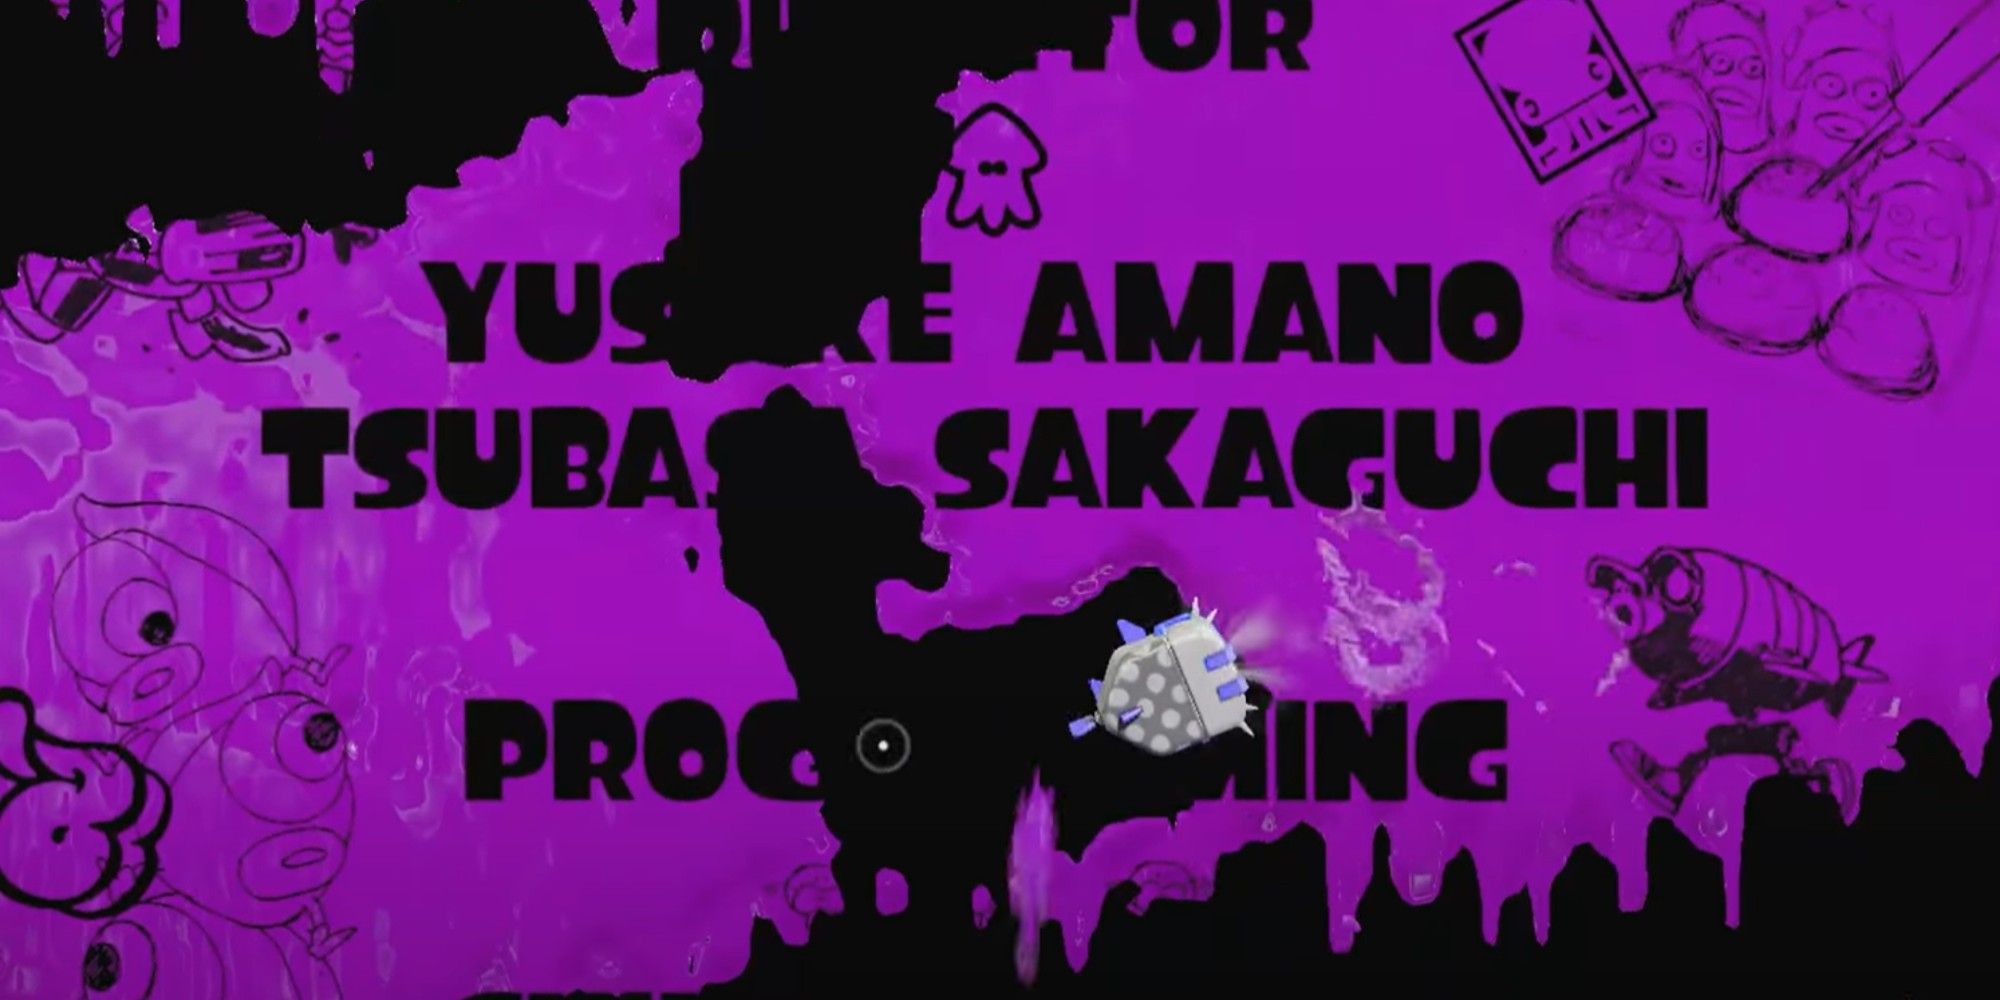 Purple ink covering most of the screen in Splatoon's credits.